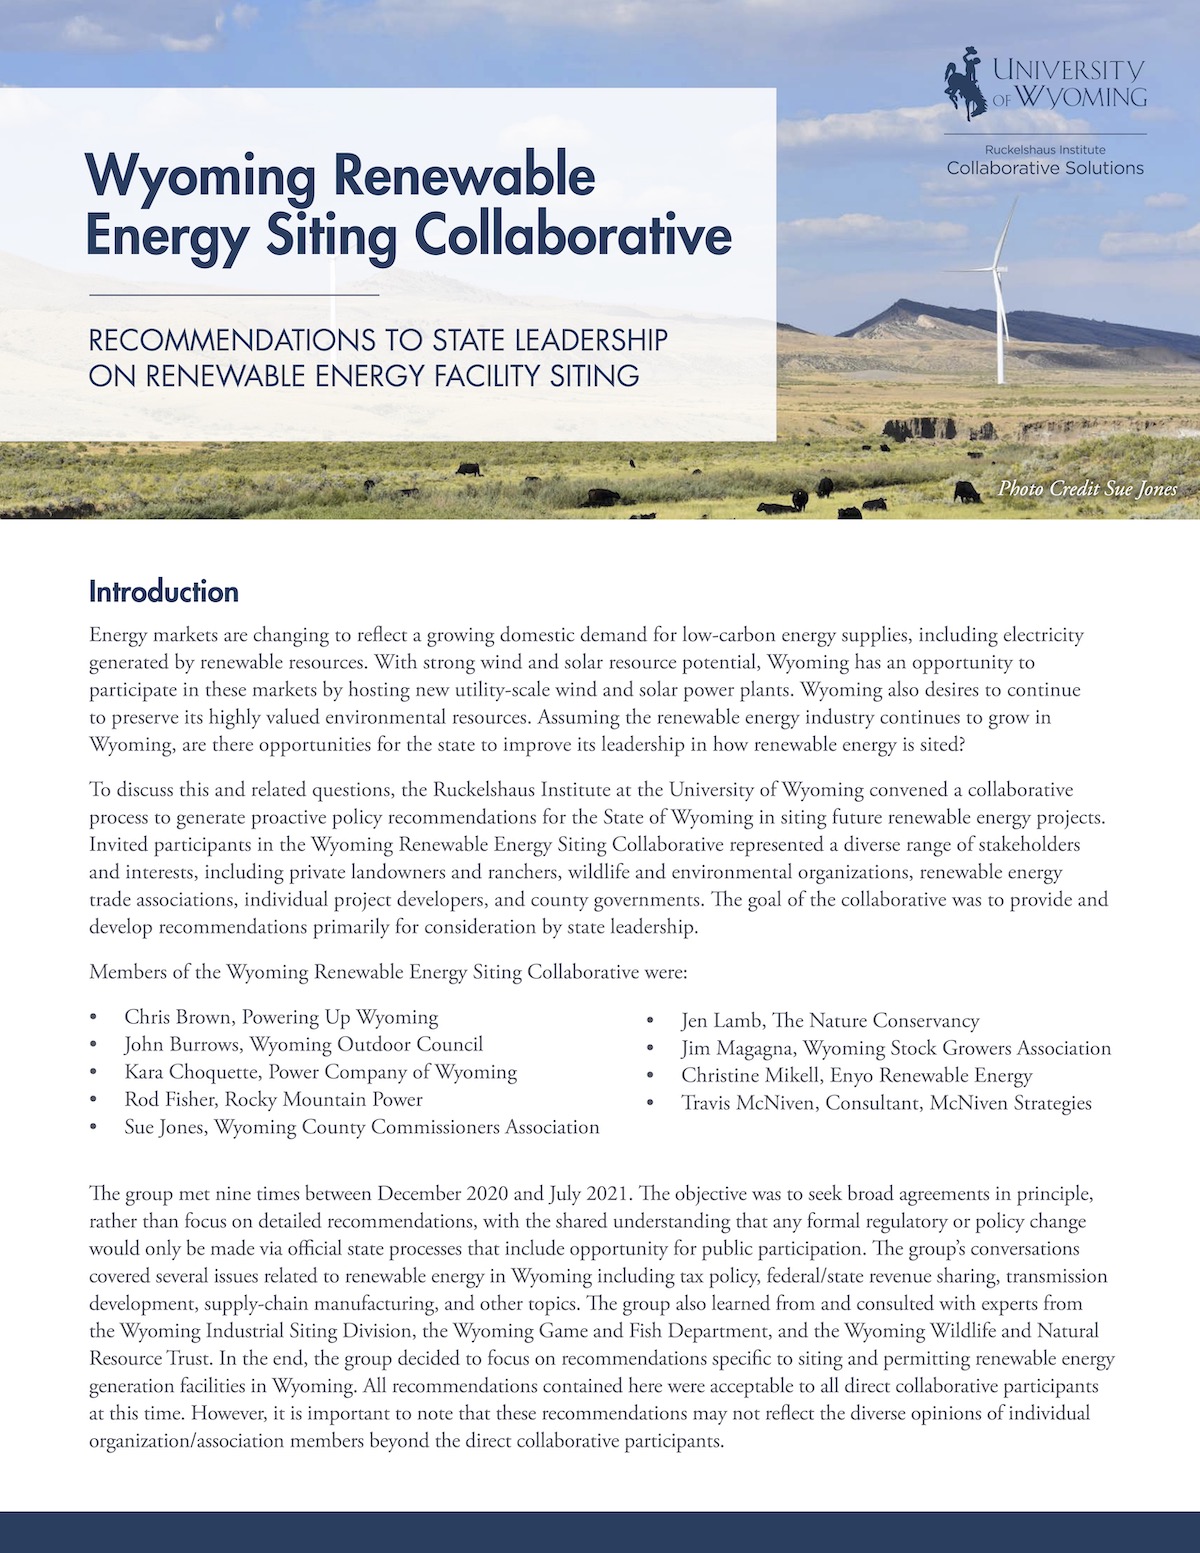 Cover of Wyoming Renewable Energy Siting Collaborative report with image of cows grazing near wind turbines.